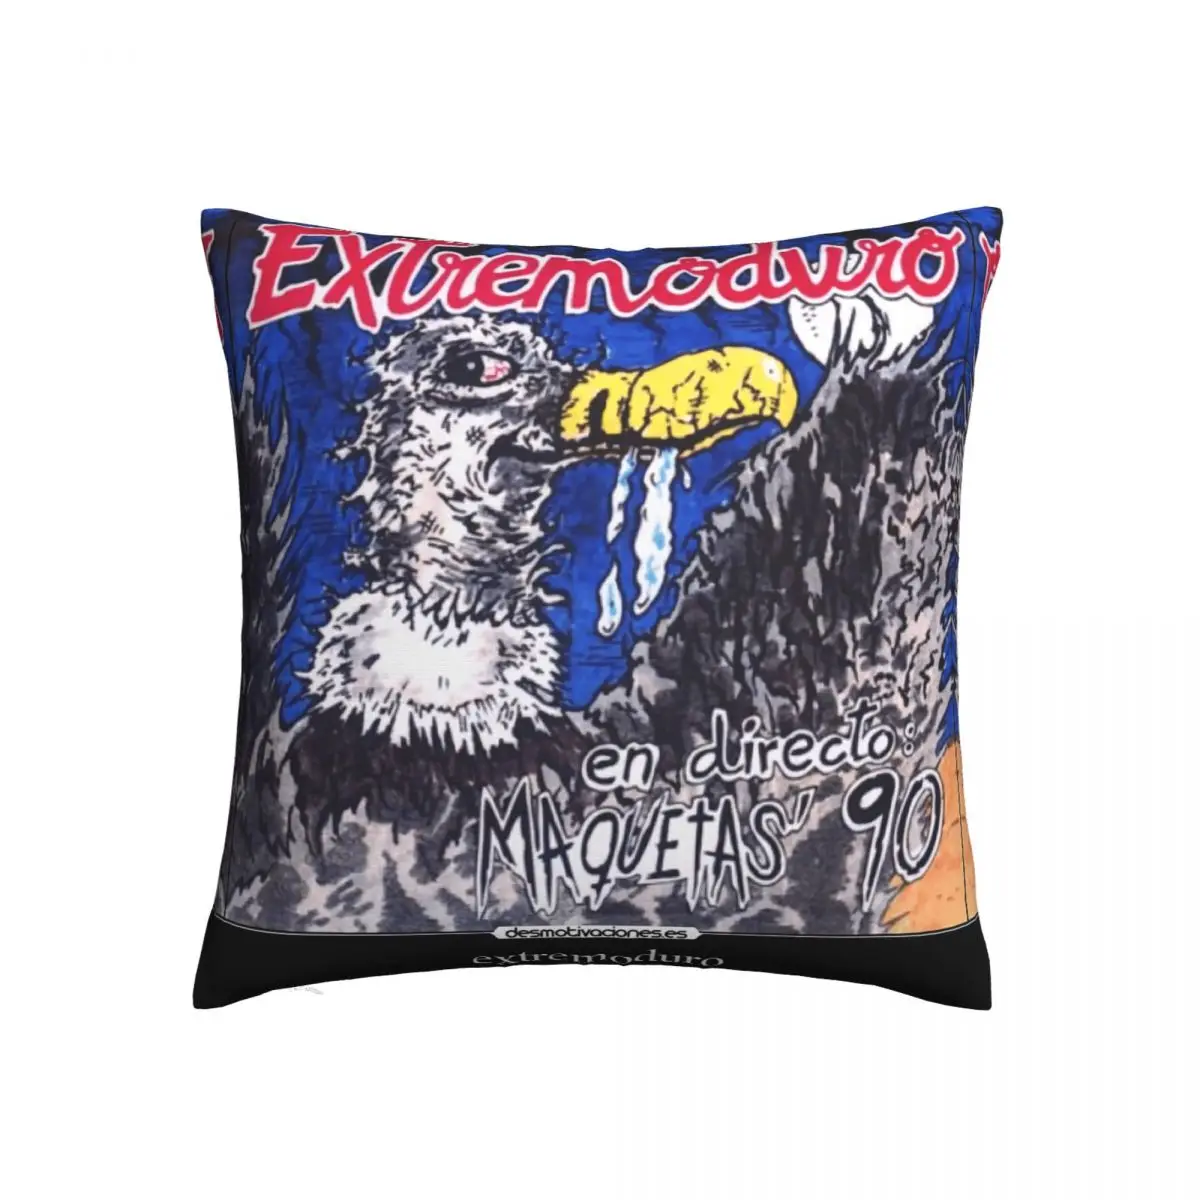 

Square Pillow Extremoduro 1 Graphic Cool R251 Weeping Willow Square Pillow Print Humor Graphic Bolster